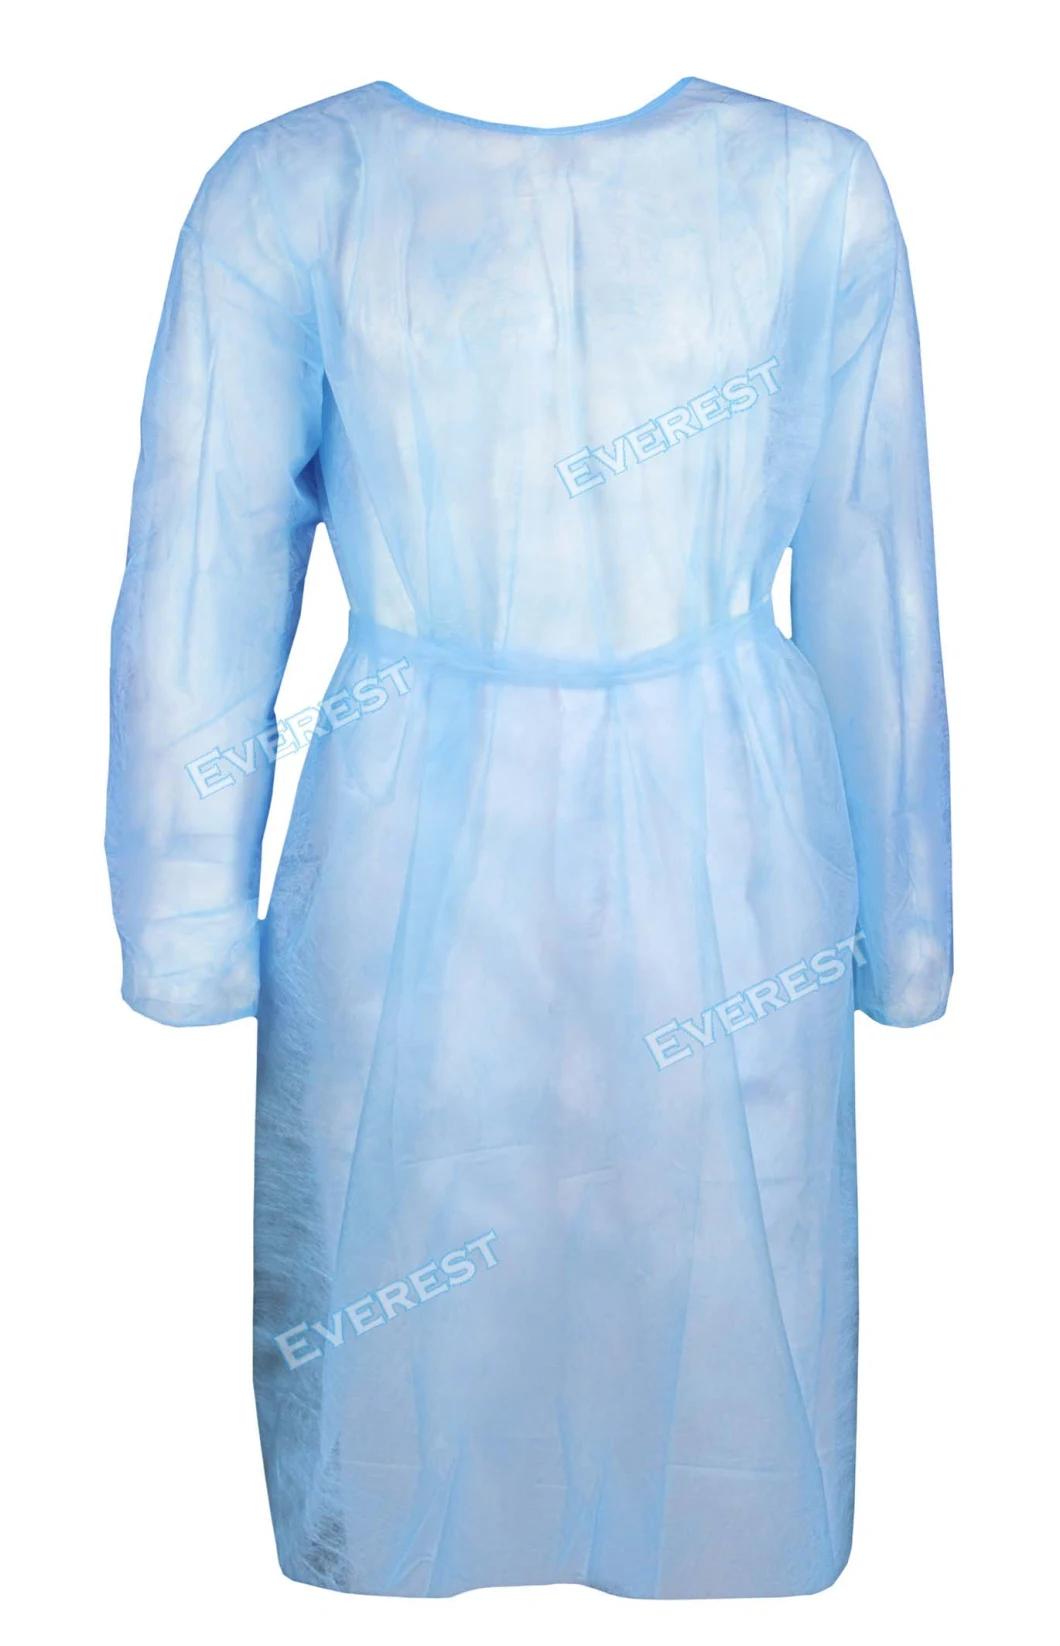 Sterile Disposable SMS Non Woven Surgical Gown Supplier